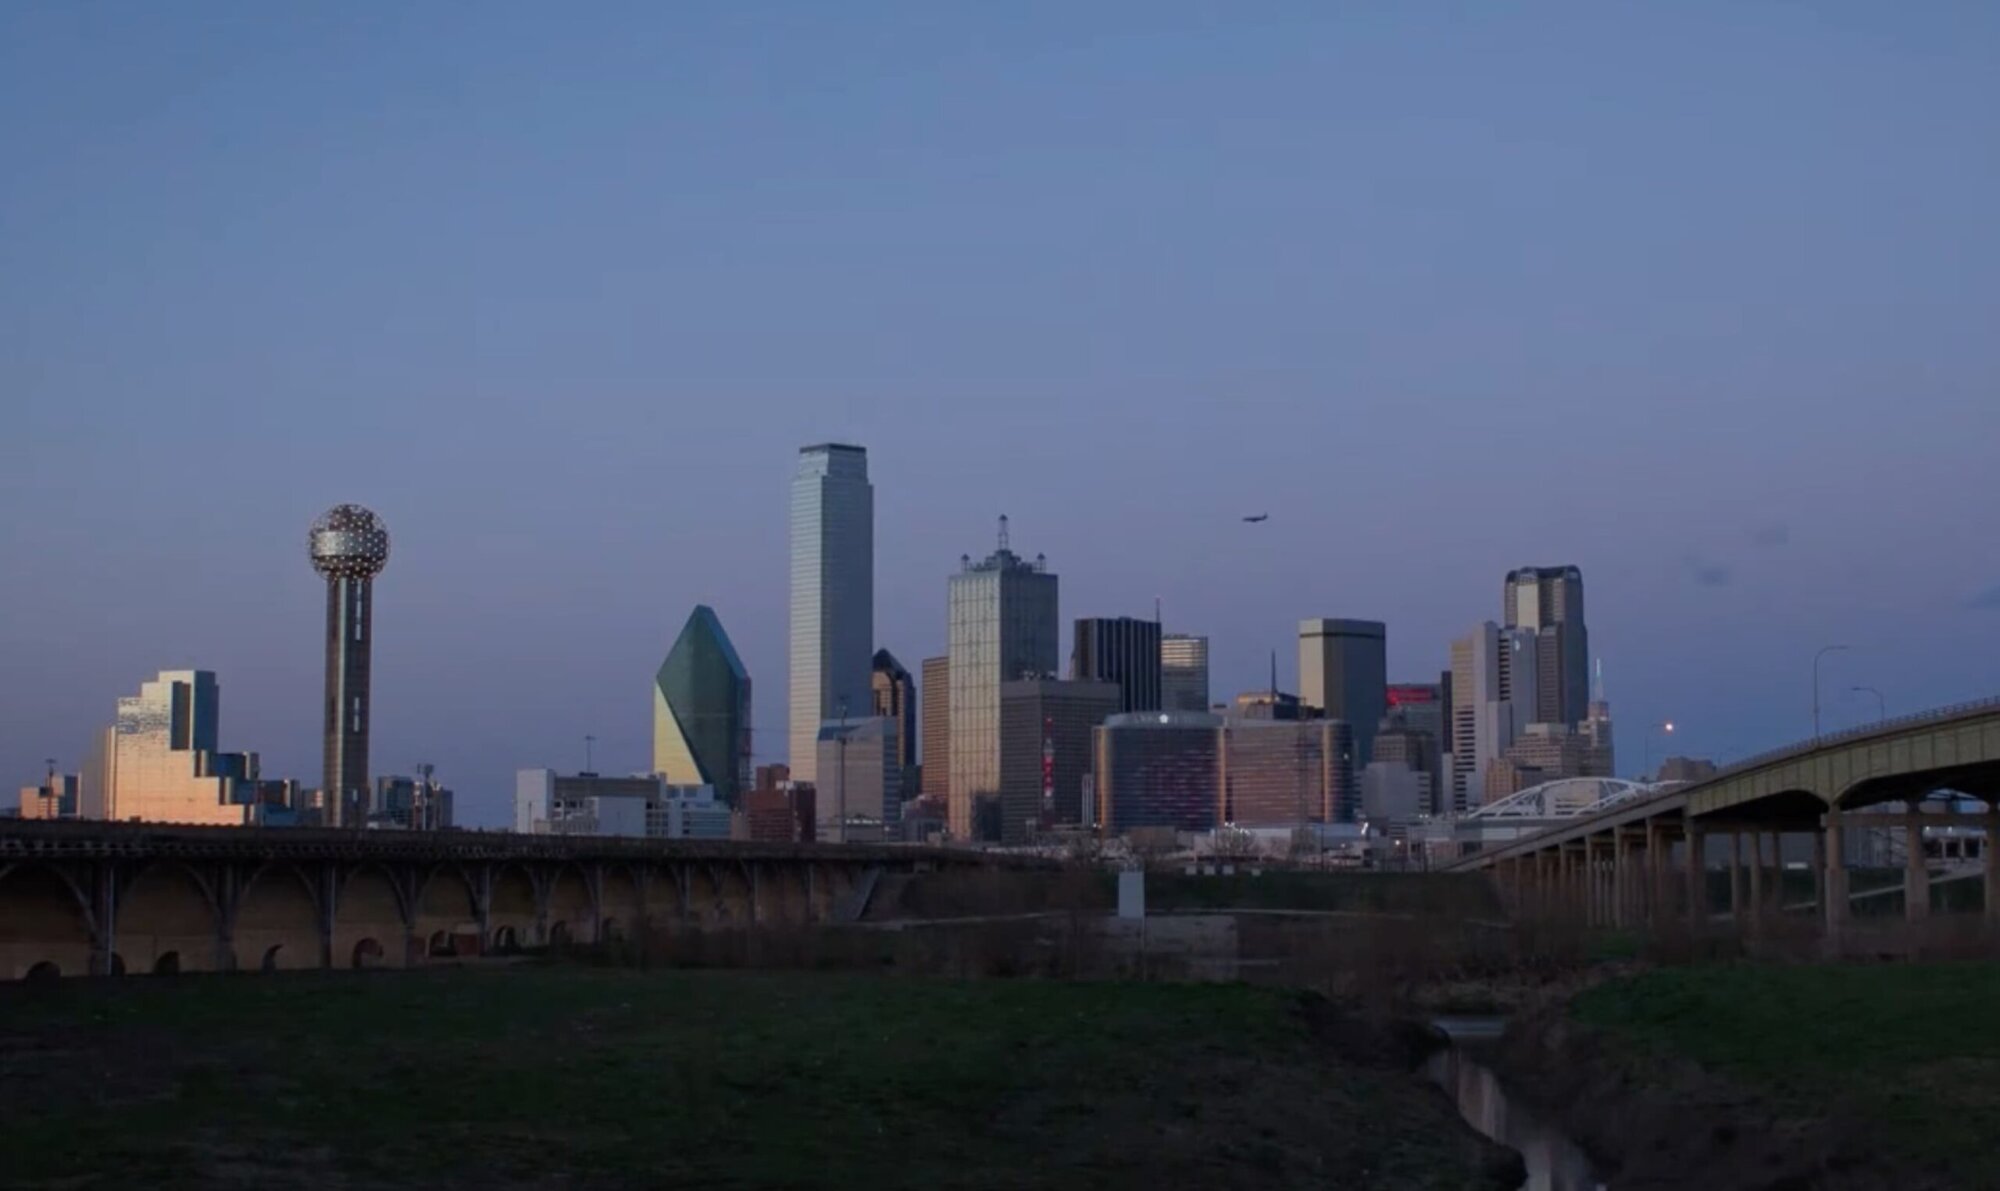 Sunset Timelapse Over The Dallas Skyline From The Trinity River Levee